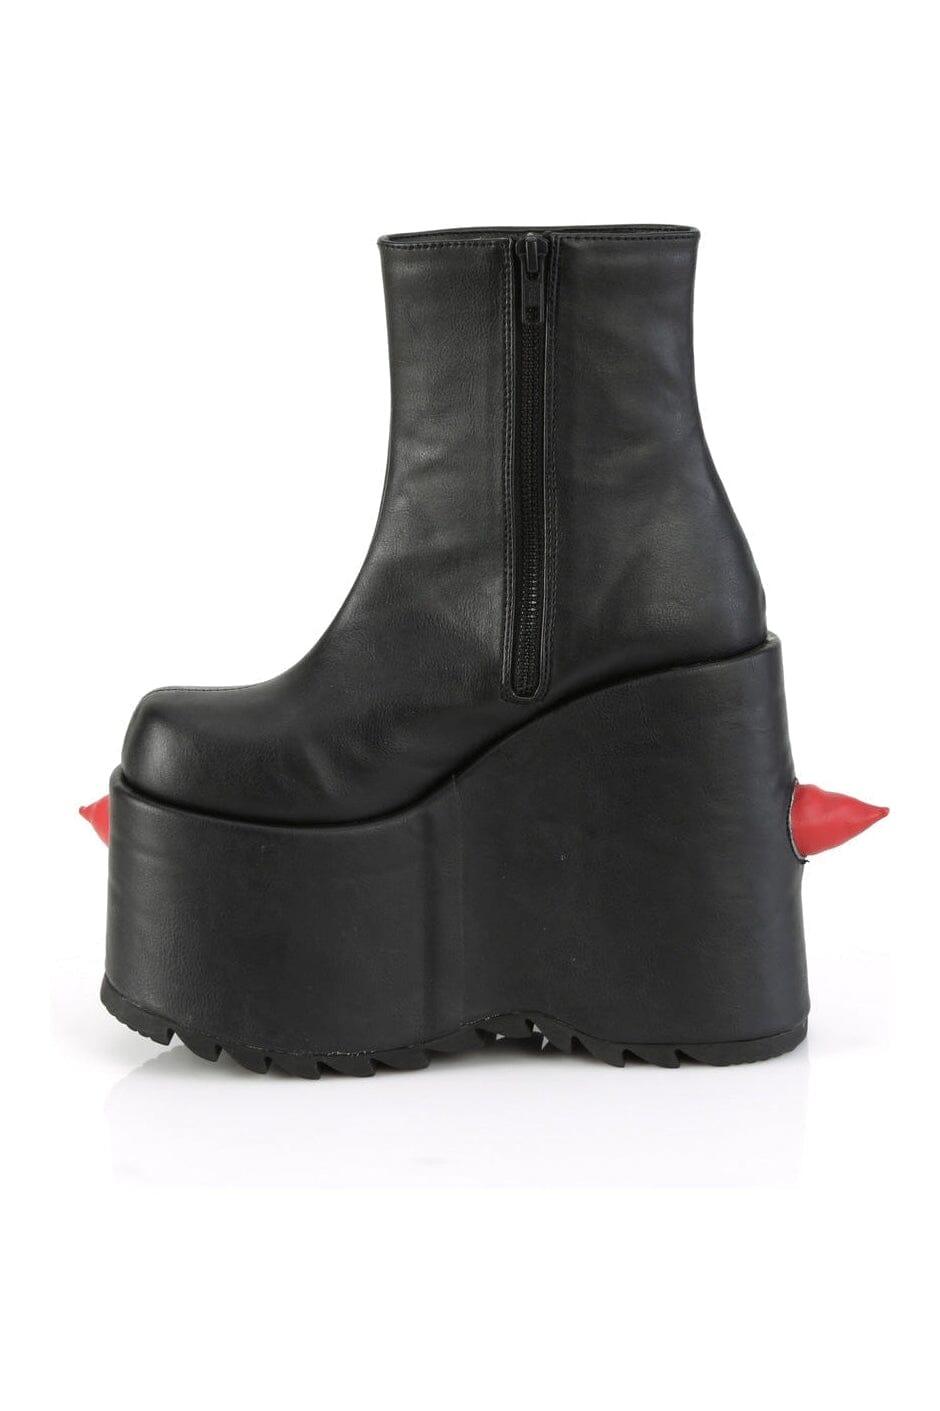 SLAY-77 Black Vegan Leather Ankle Boot-Ankle Boots-Demonia-SEXYSHOES.COM